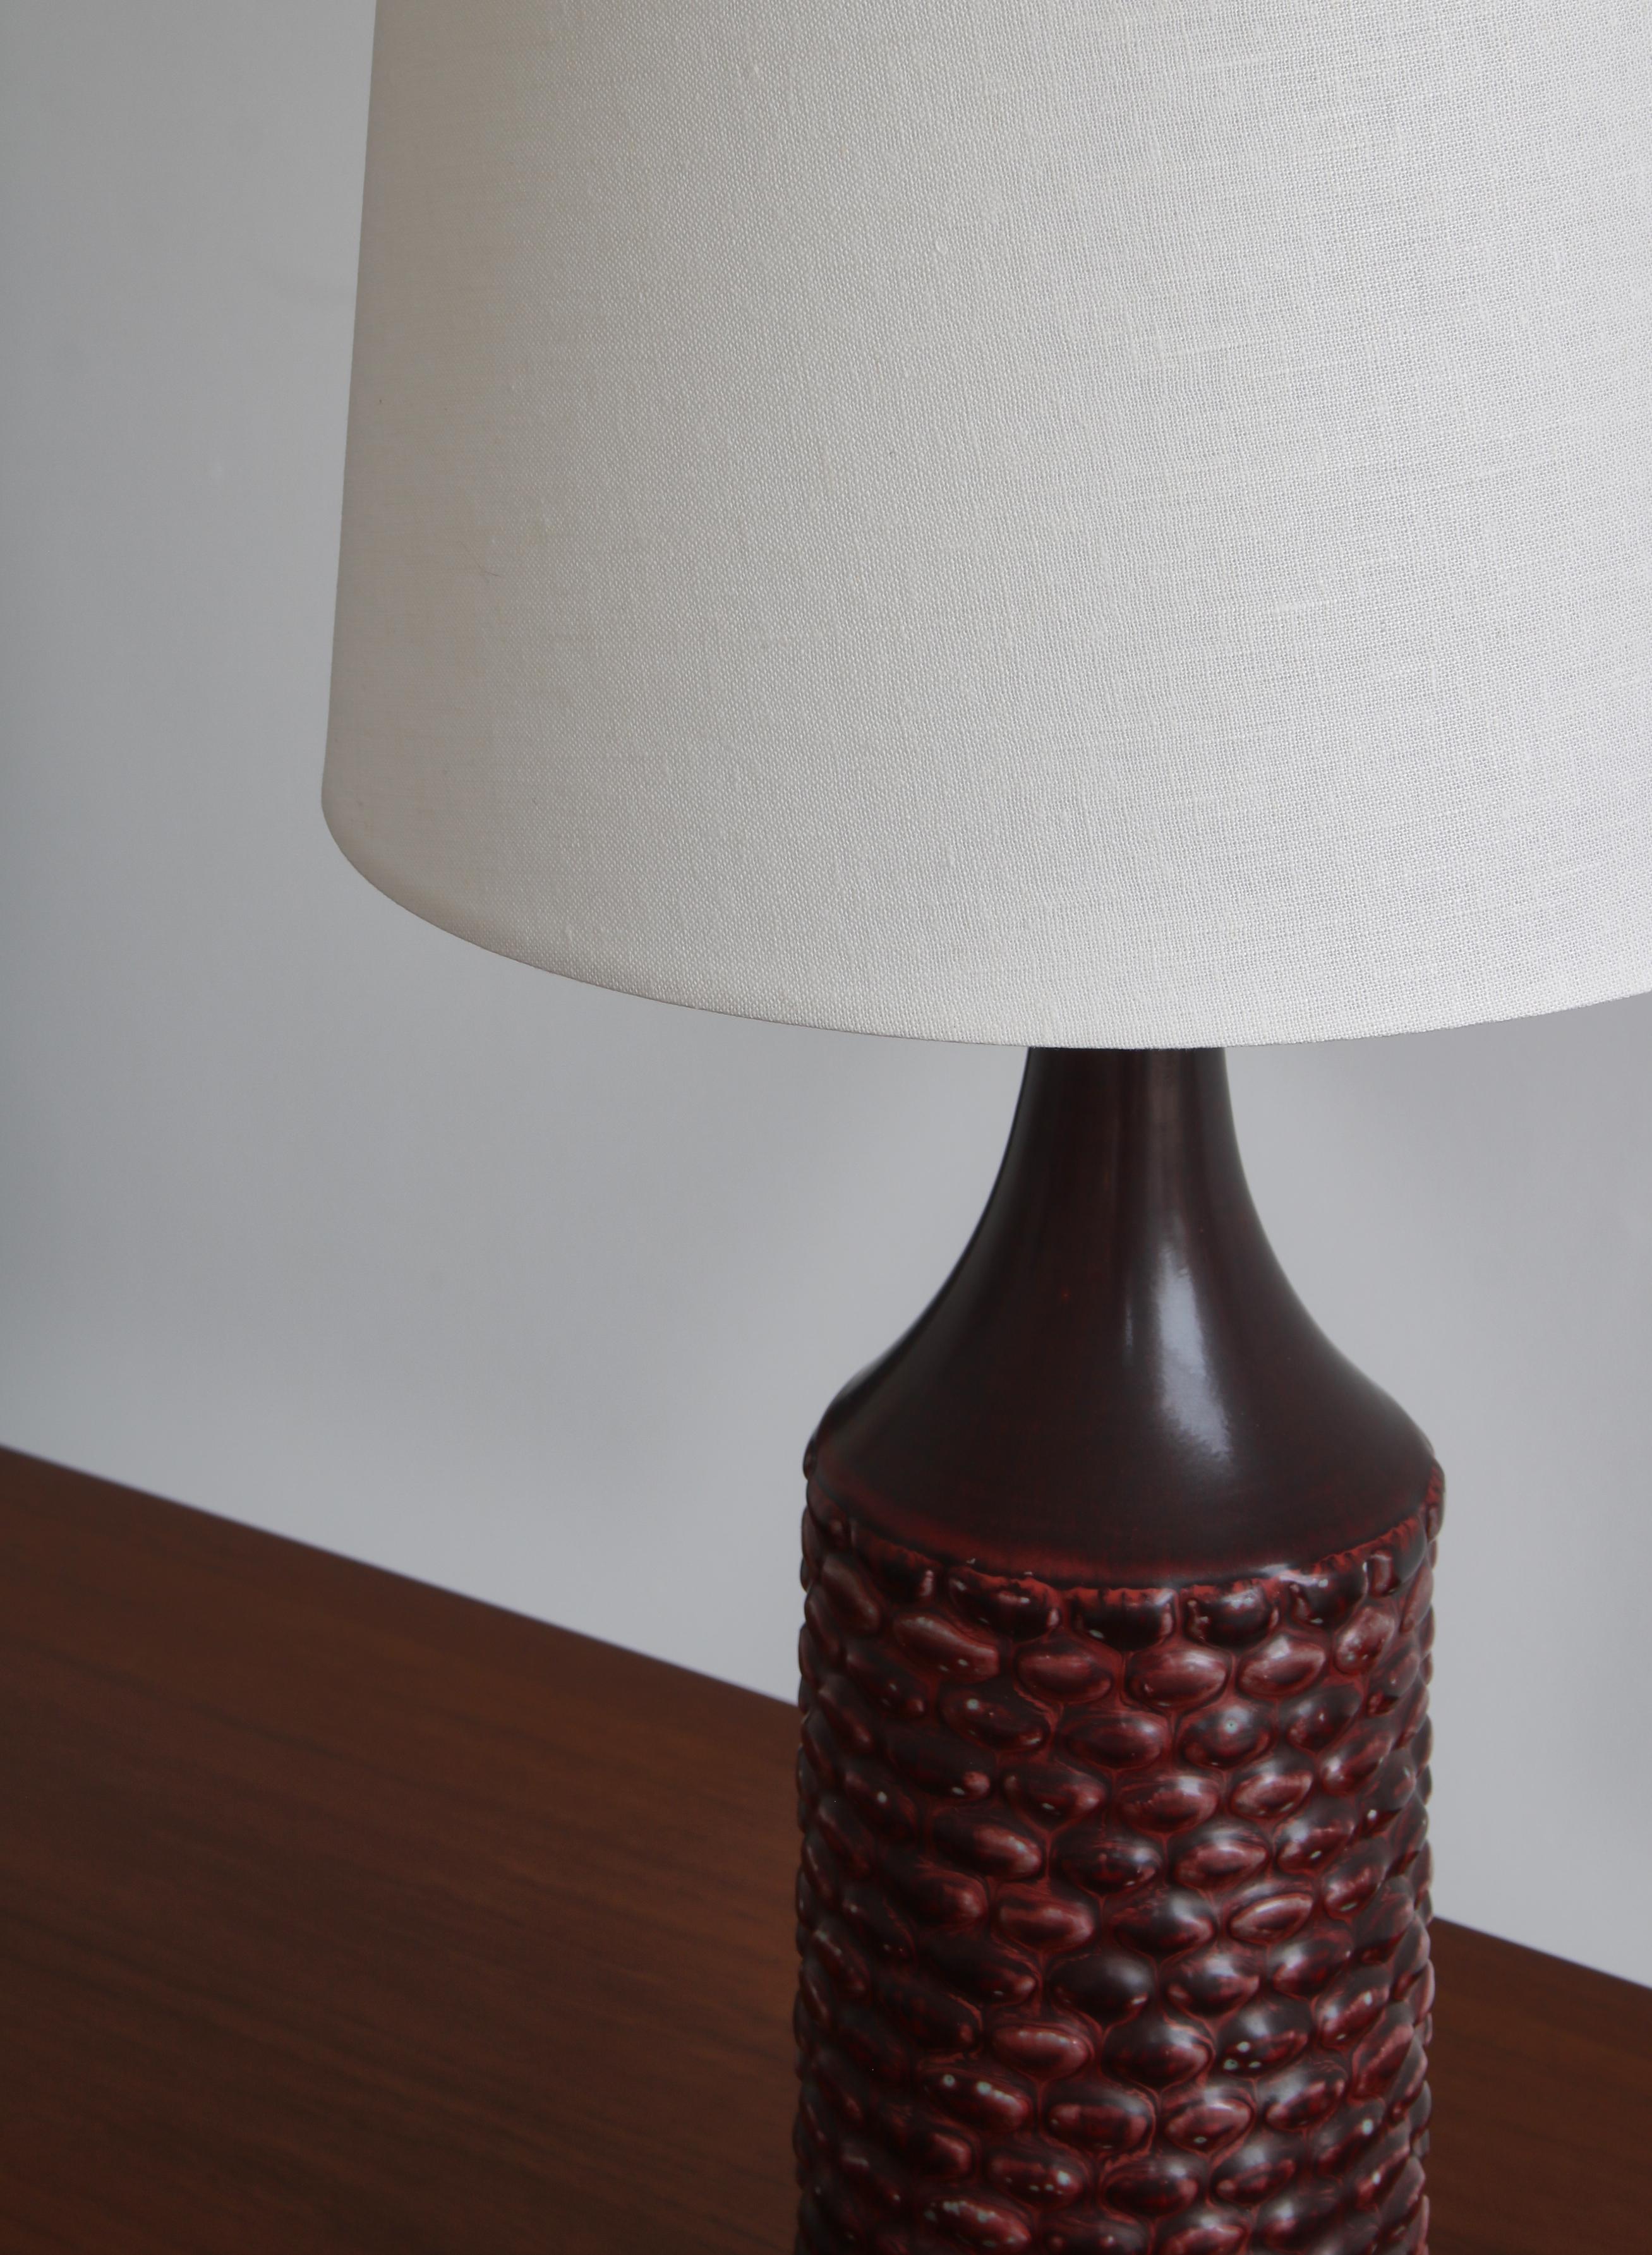 Stoneware Axel Salto Large Table Lamp in Oxblood Glaze from Royal Copenhagen, 1958 For Sale